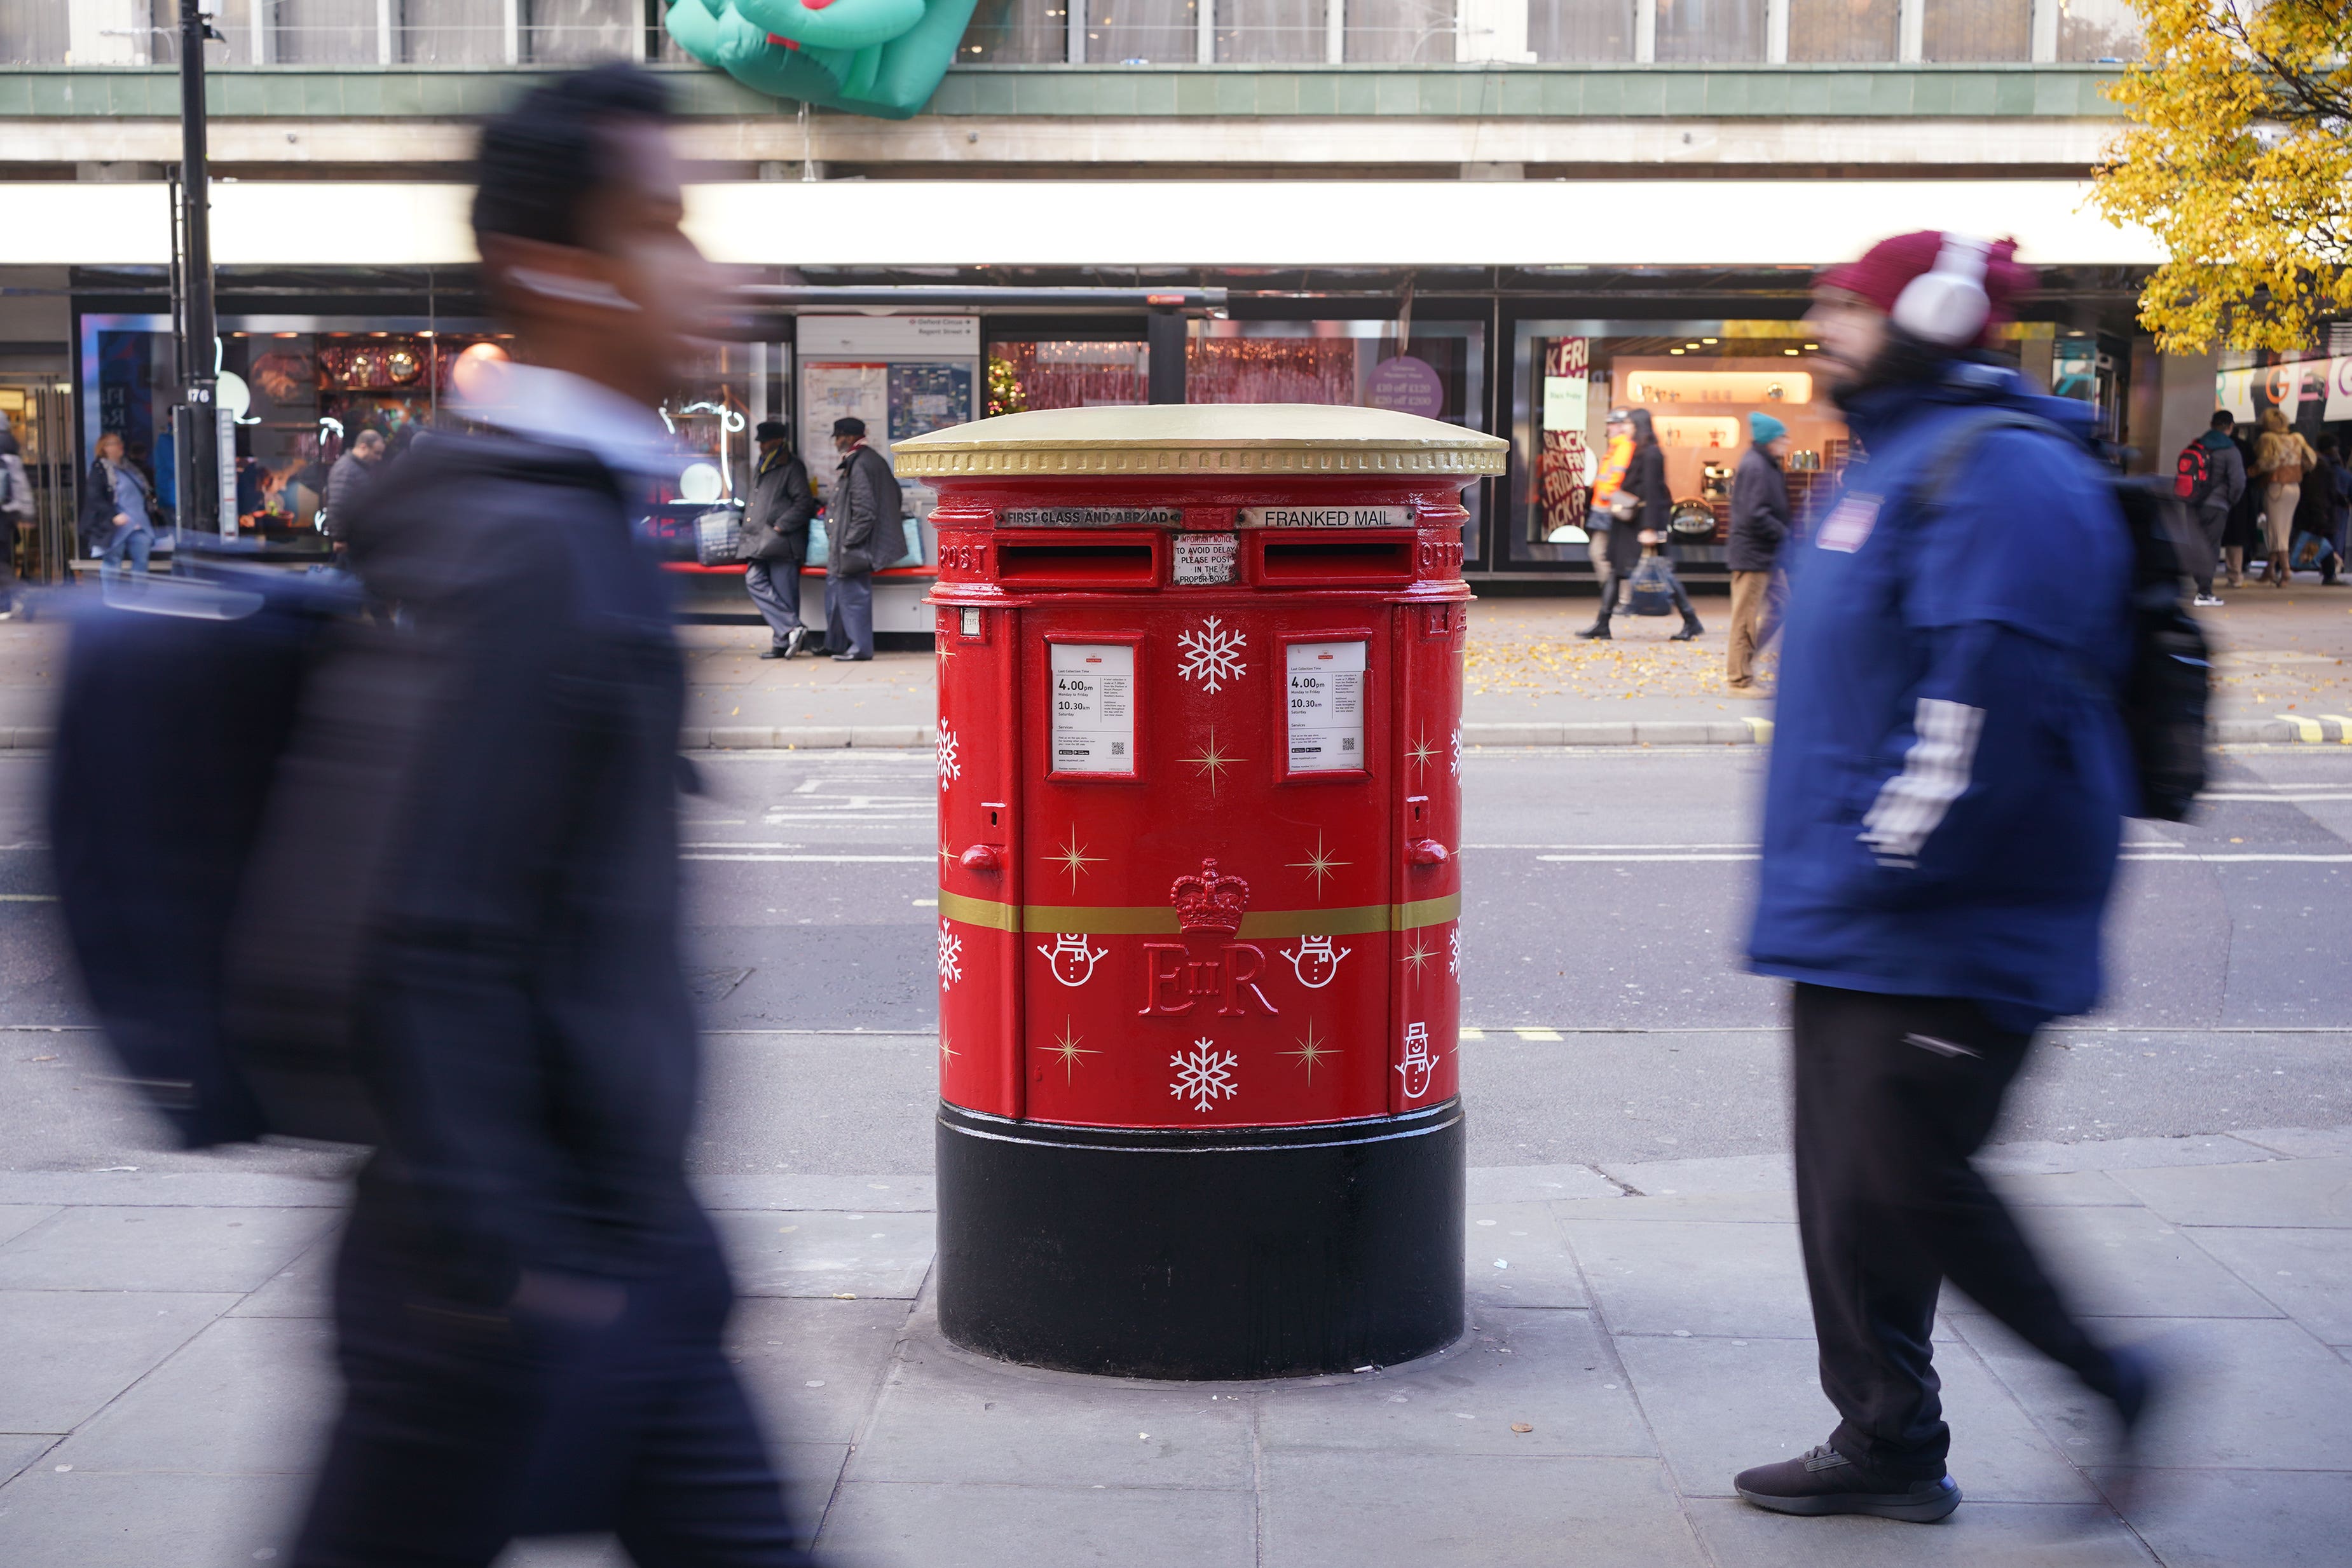 Ofcom said Royal Mail could cut the frequency or speed of deliveries as part of a cost cutting exercise